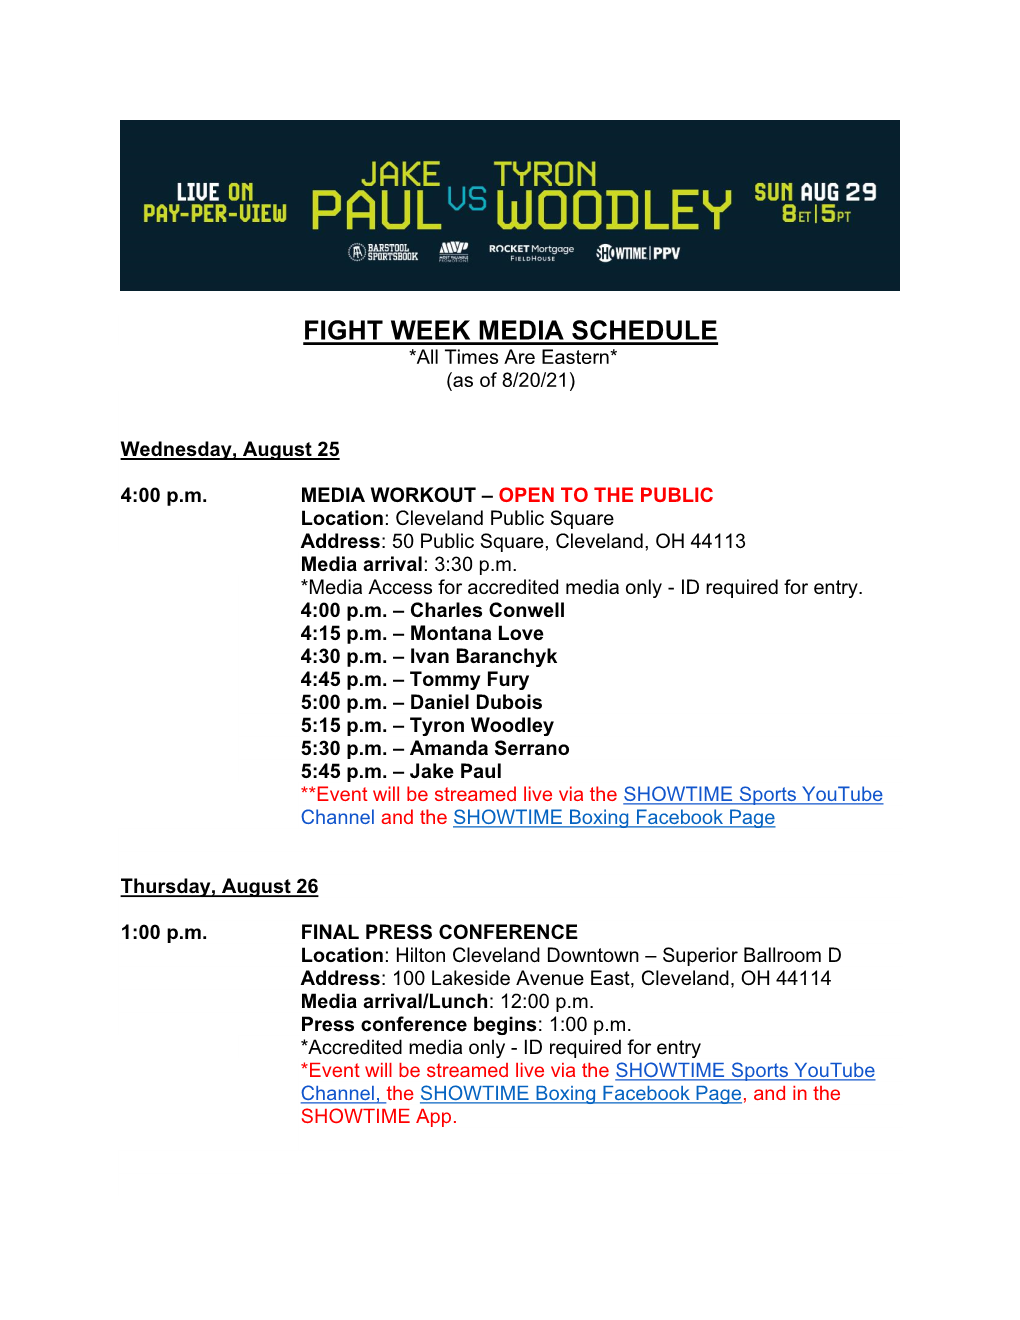 FIGHT WEEK MEDIA SCHEDULE *All Times Are Eastern* (As of 8/20/21)